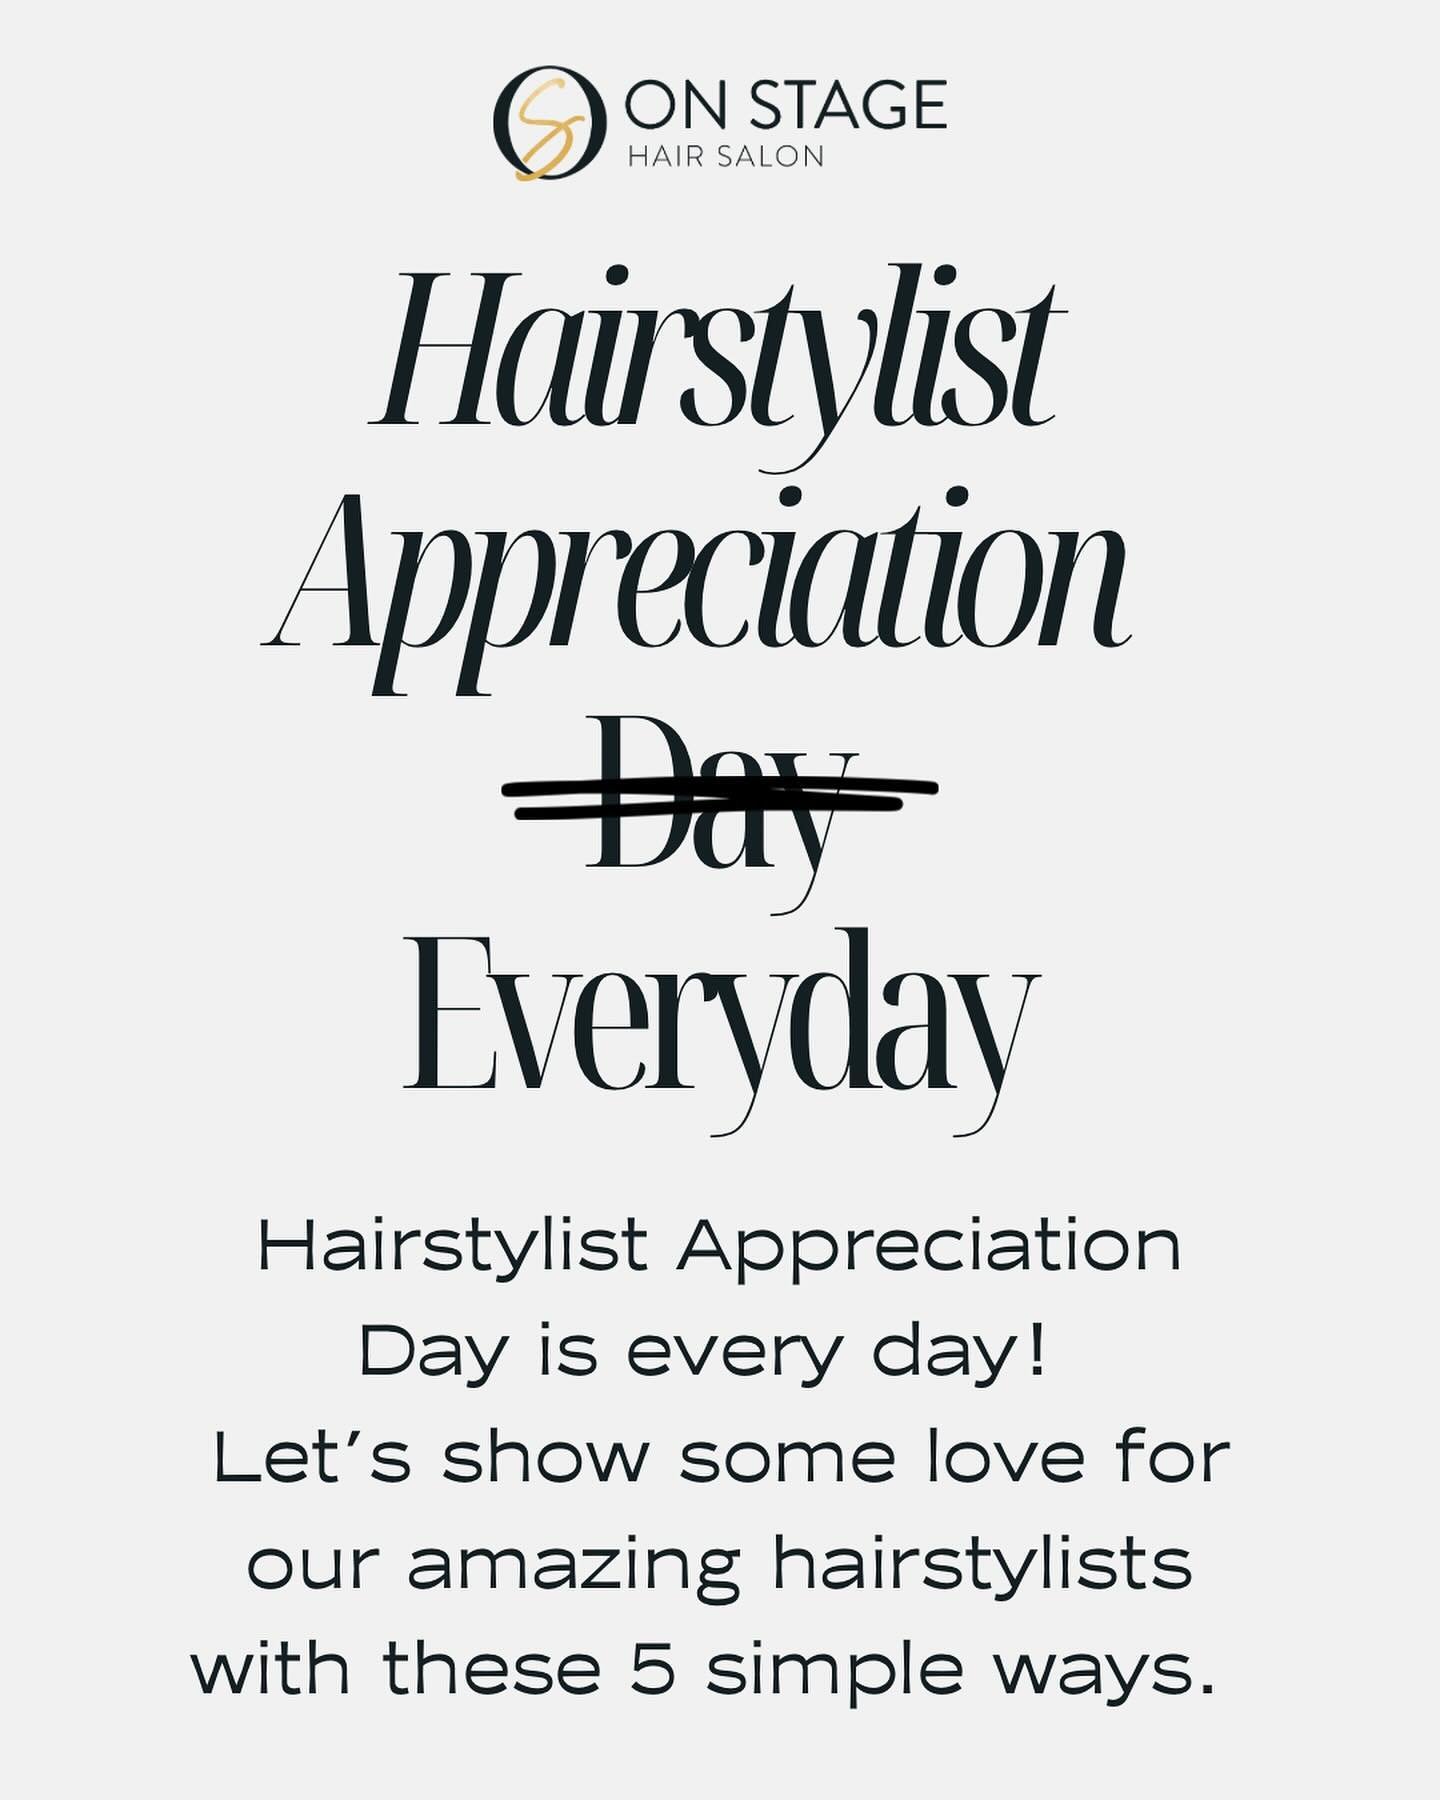 Happy Hairstylist Appreciation Day! 🫶🏻

We are so grateful for our amazing team, they are truly the most talented and kind people. We encourage you to practice hairstylist appreciation EVERY DAY, and with these 5 tips you can support your hairstyli